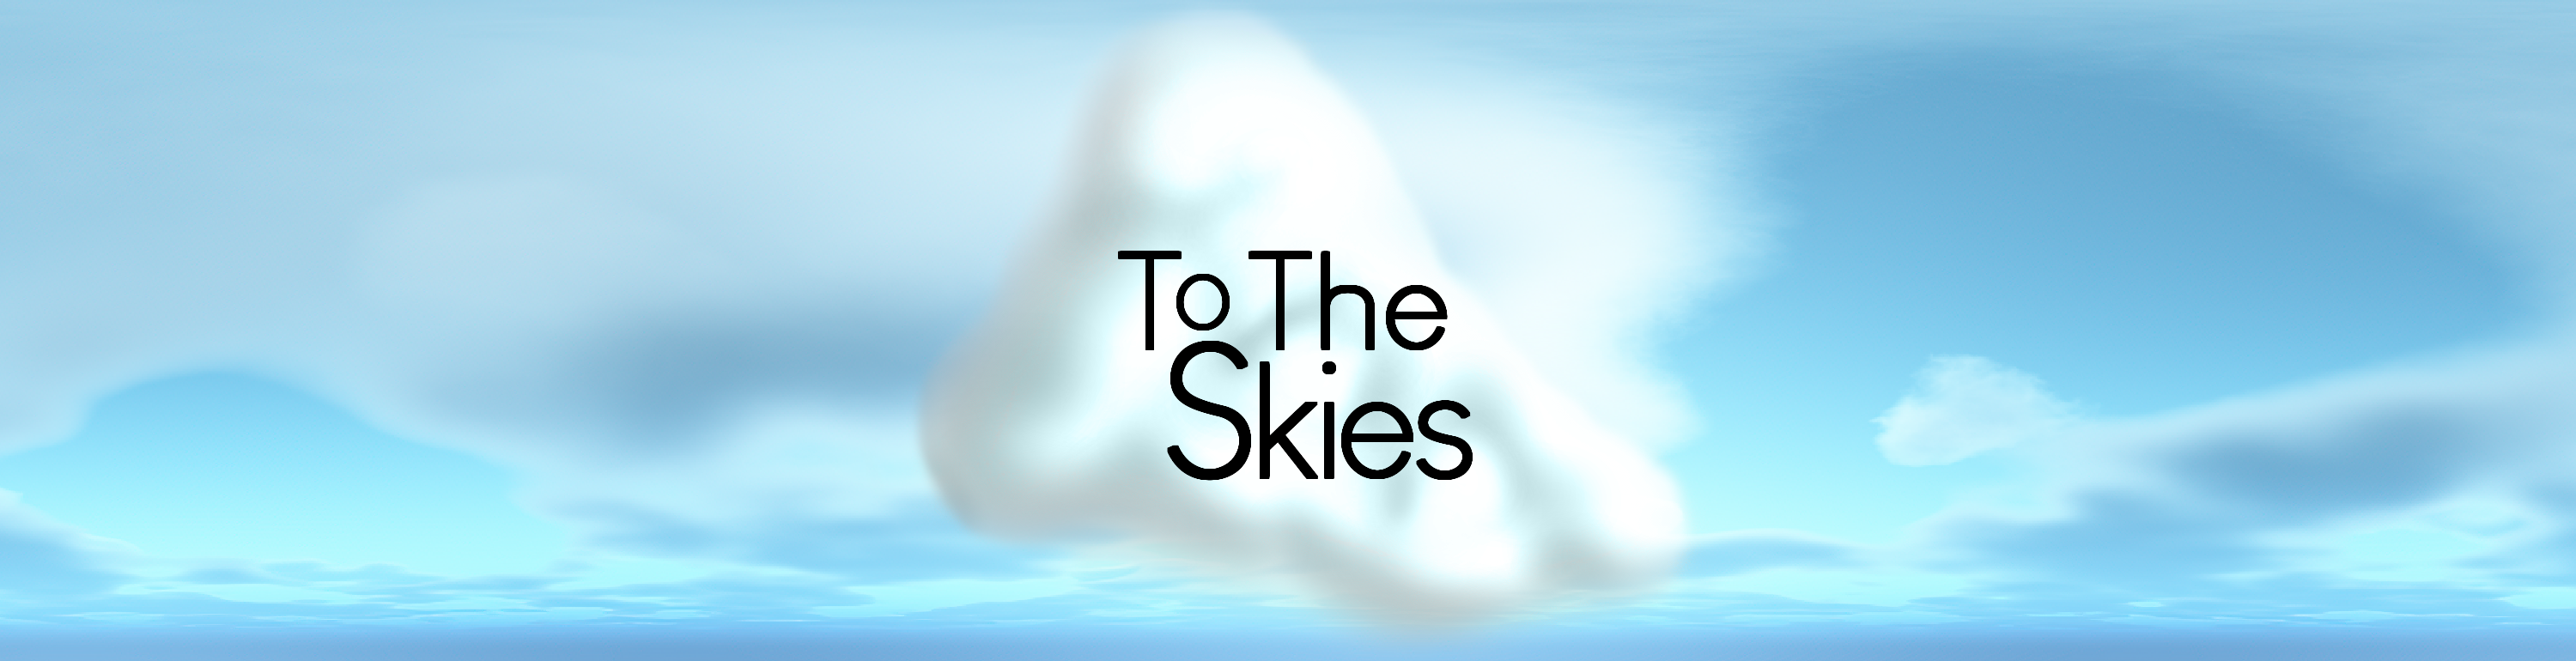 To The Skies